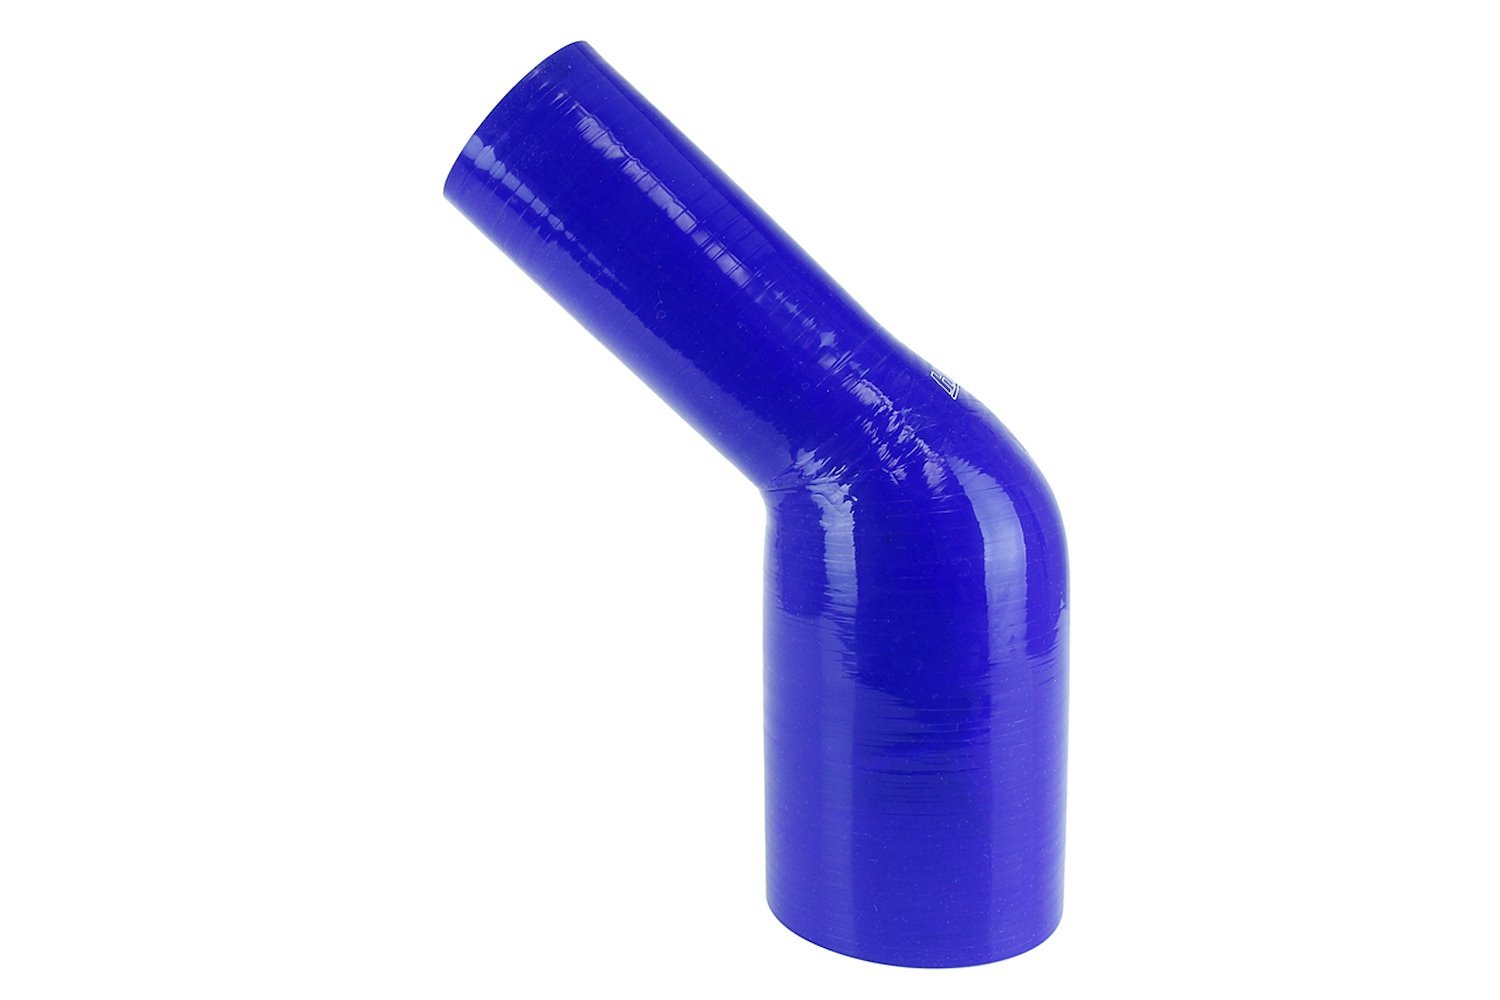 HTSER45-250-275-BLUE Silicone 45-Degree Elbow Hose, High-Temp 4-Ply Reinforced, 2-1/2 in. - 2-3/4 in. ID, Blue